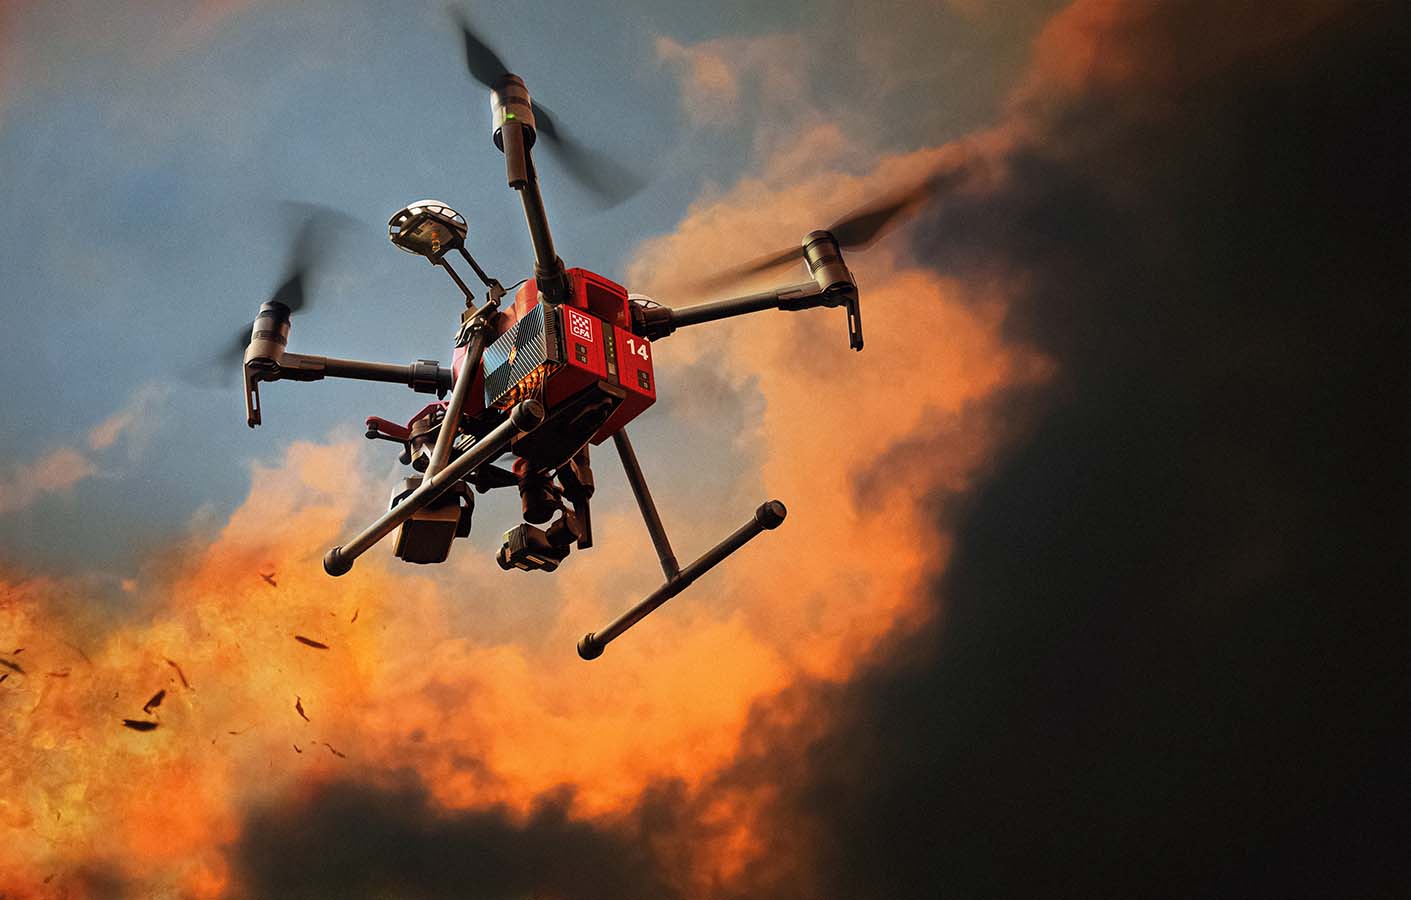 A visualisation demonstrating the HyphaMAP device mounted to a drone, which is flying through a bushfire scenario.